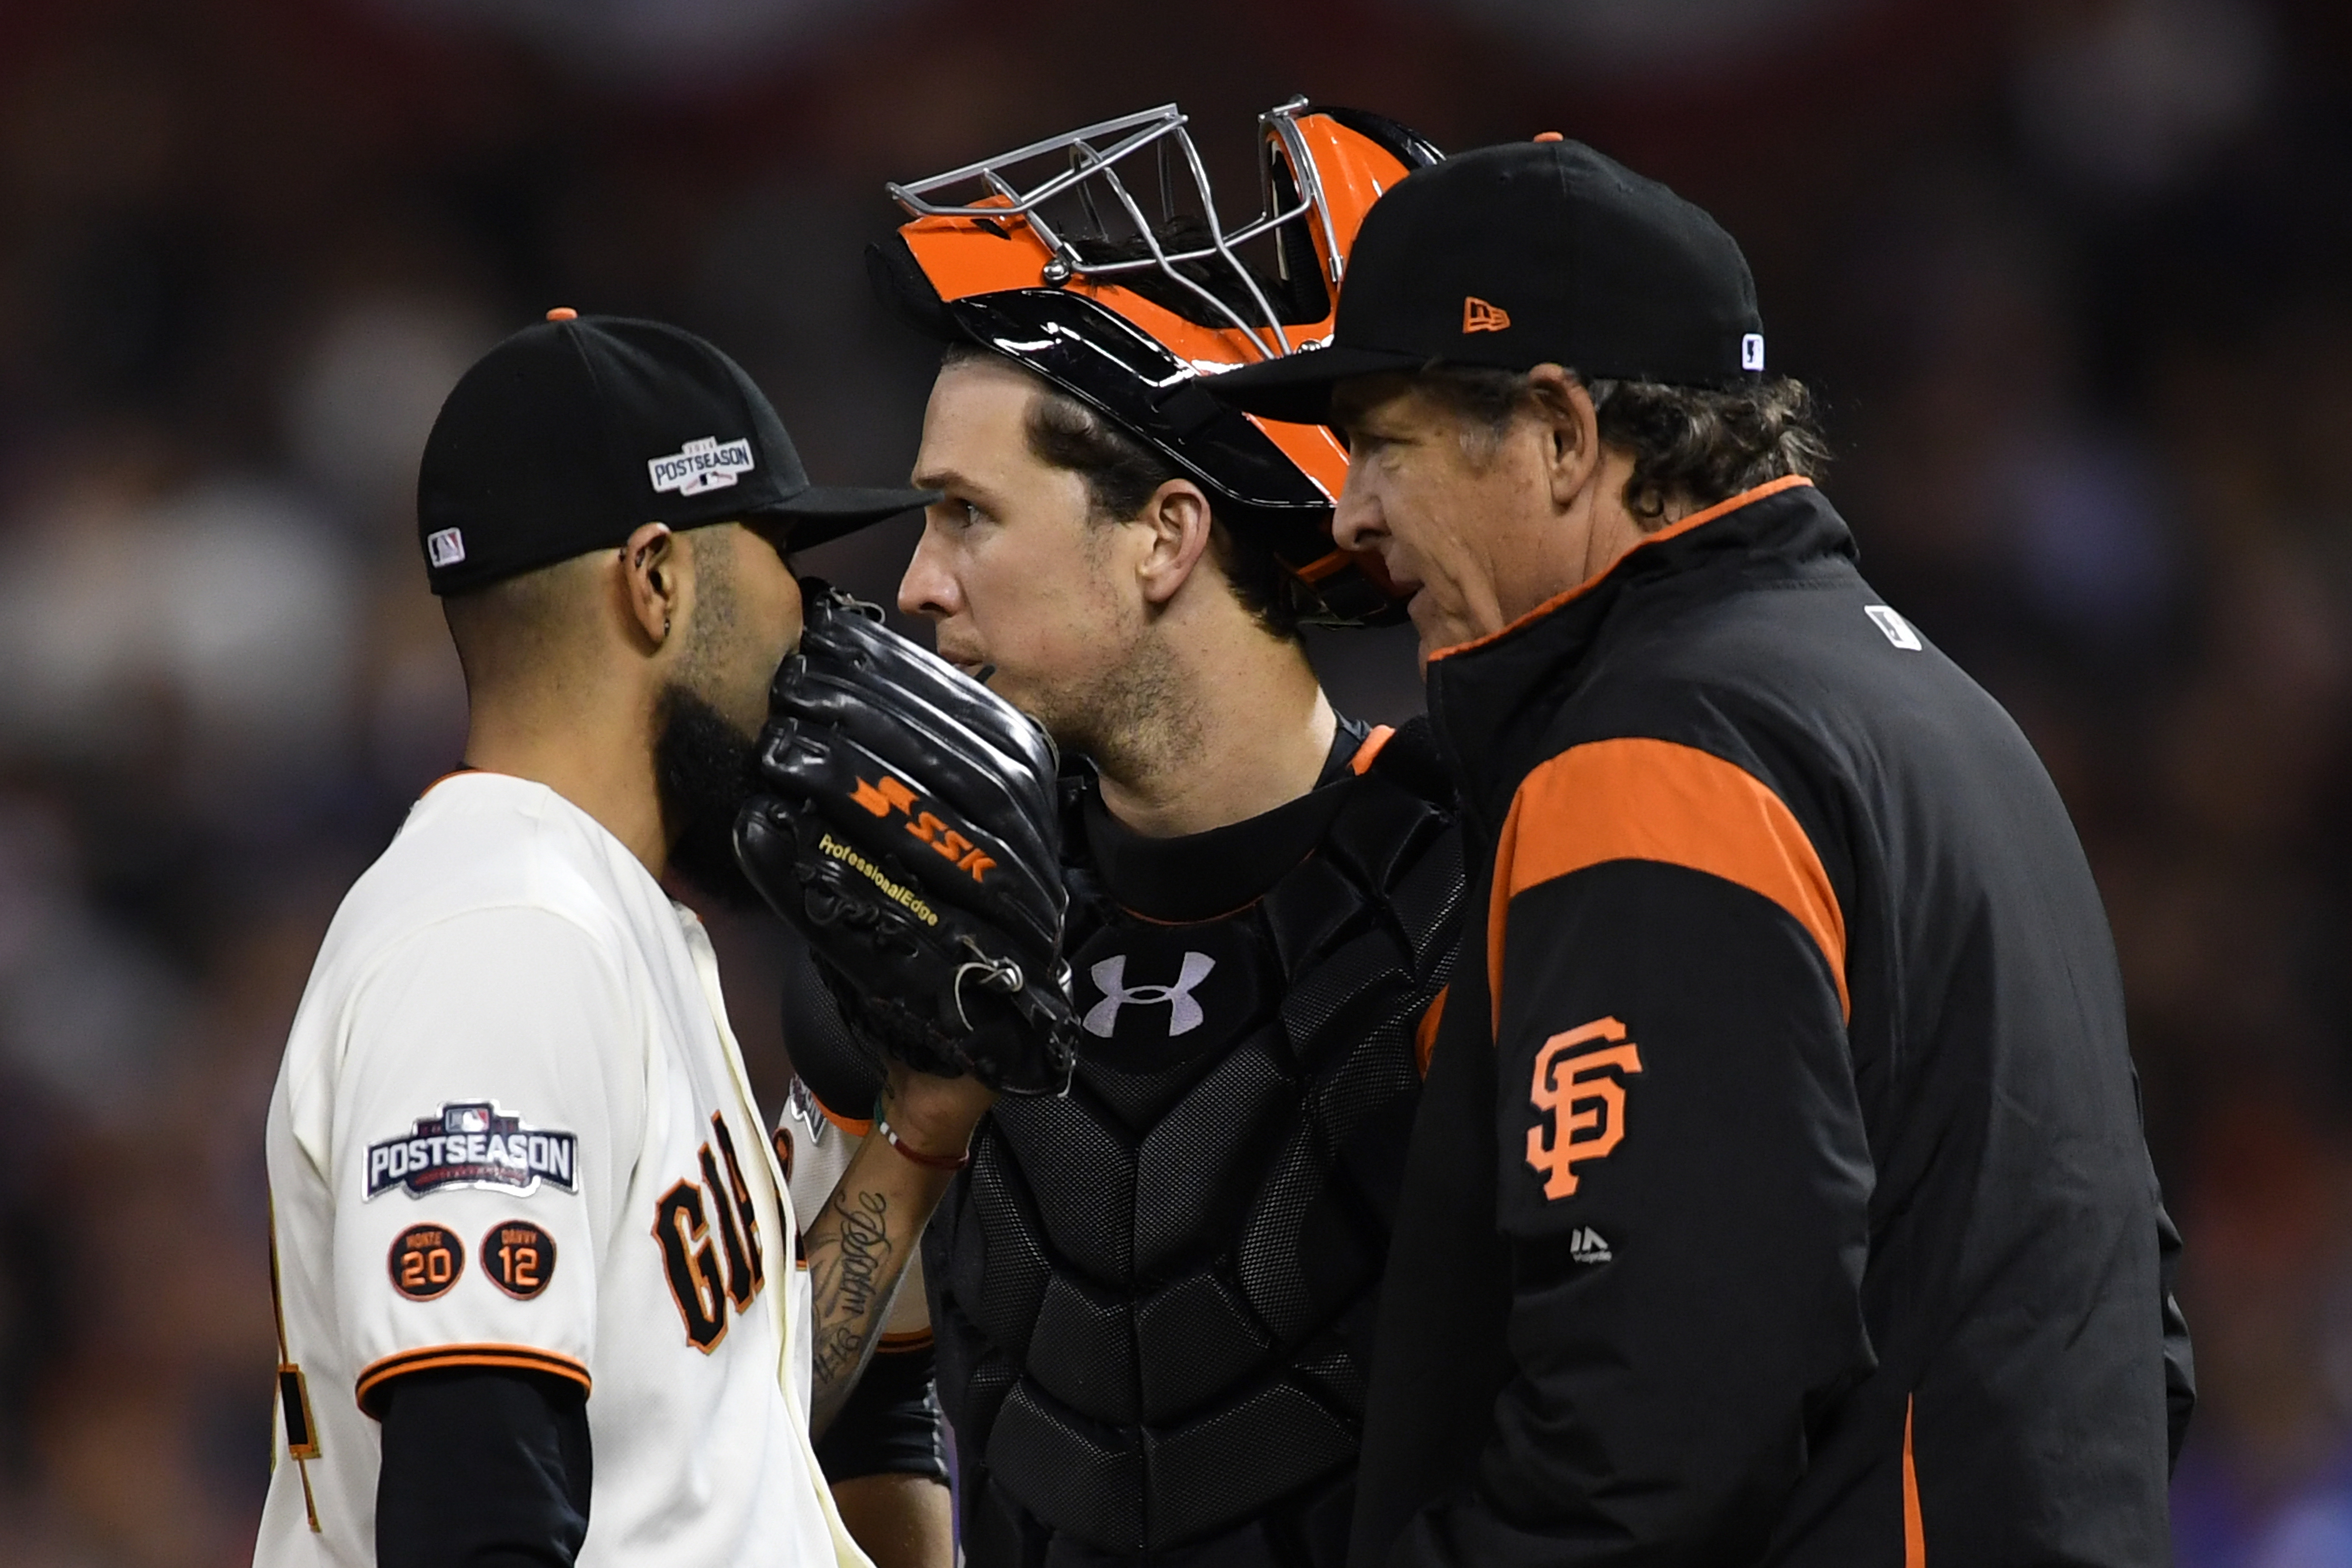 SAN FRANCISCO, CA - OCTOBER 11: Sergio Romo #54, Buster Posey #28 and Dave Righetti #19 of the San Francisco Giants confer on the mound in the ninth inning of Game Four of their National League Division Series against the Chicago Cubs at AT&T Park on October 11, 2016 in San Francisco, California.